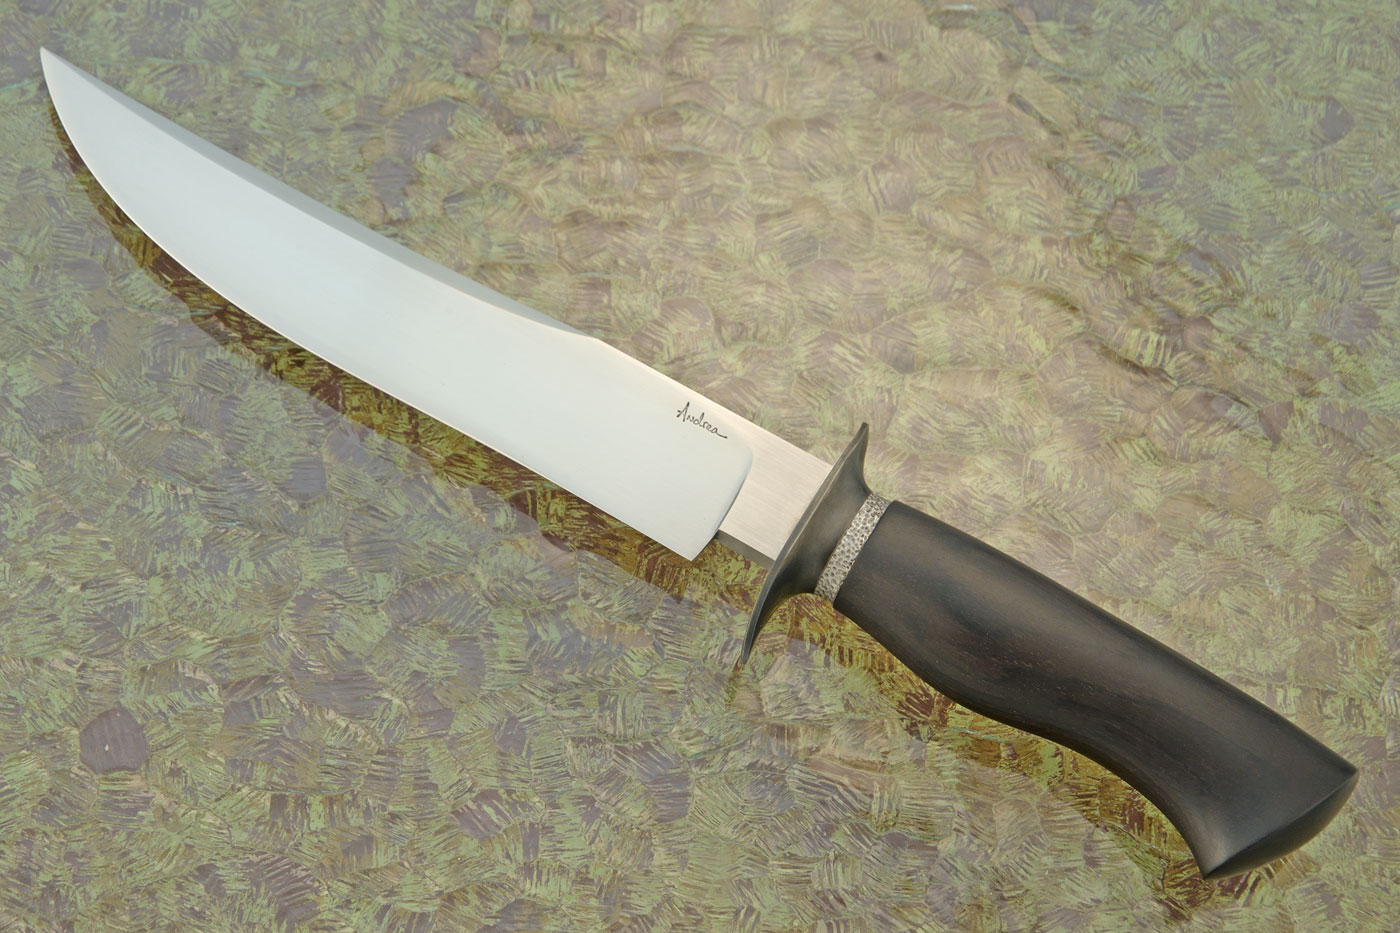 Clip Point Bowie with African Blackwood - <i>Journeyman Smith Test Knife</i>